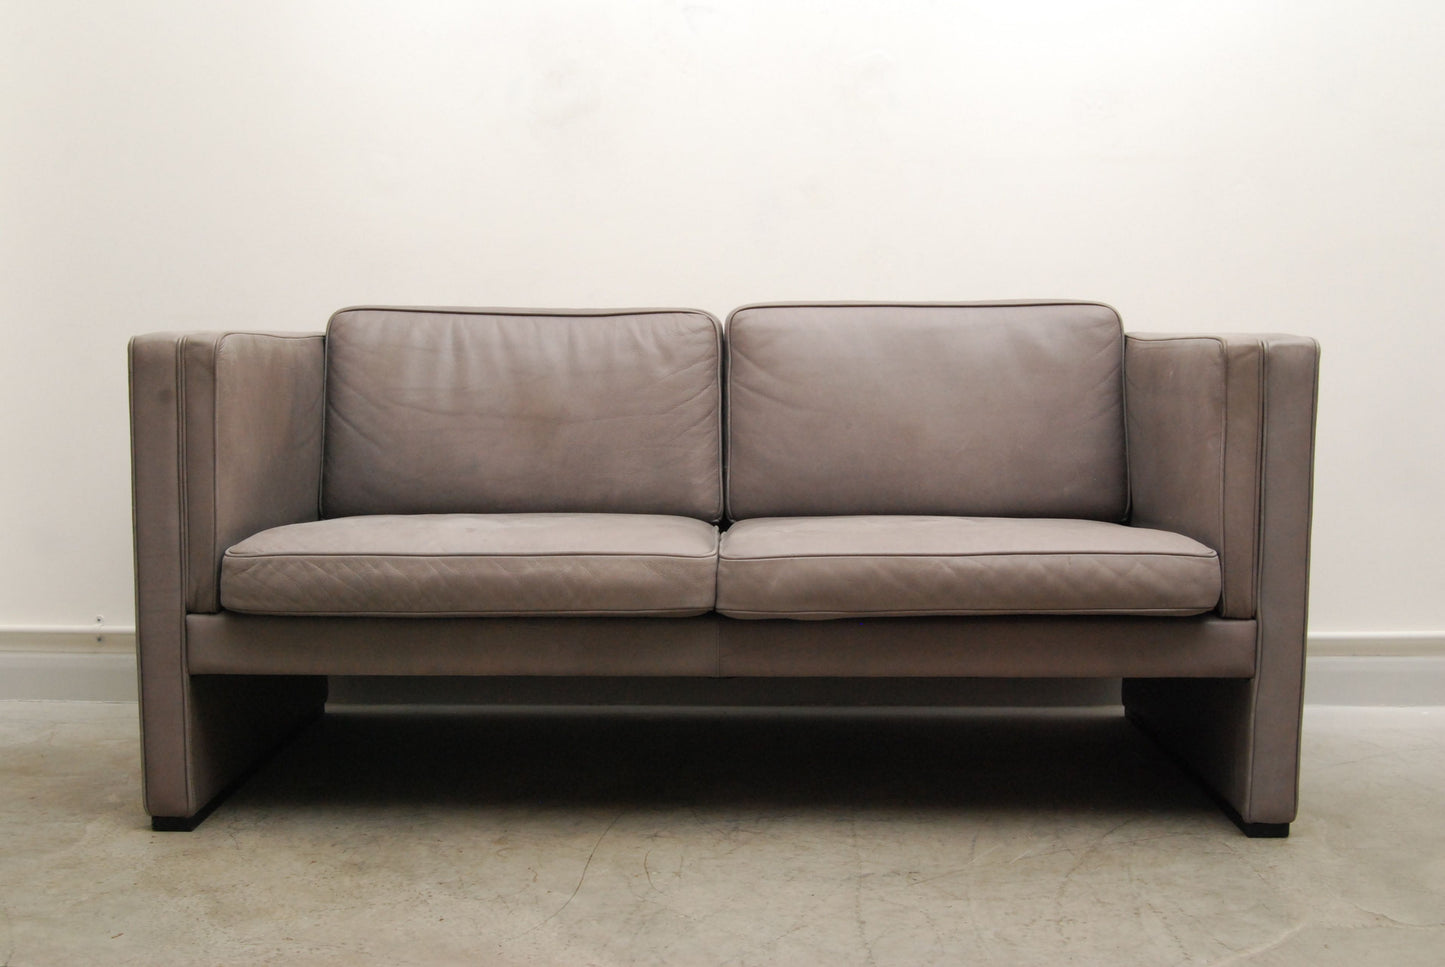 New price: Two seat sofa in gray leather